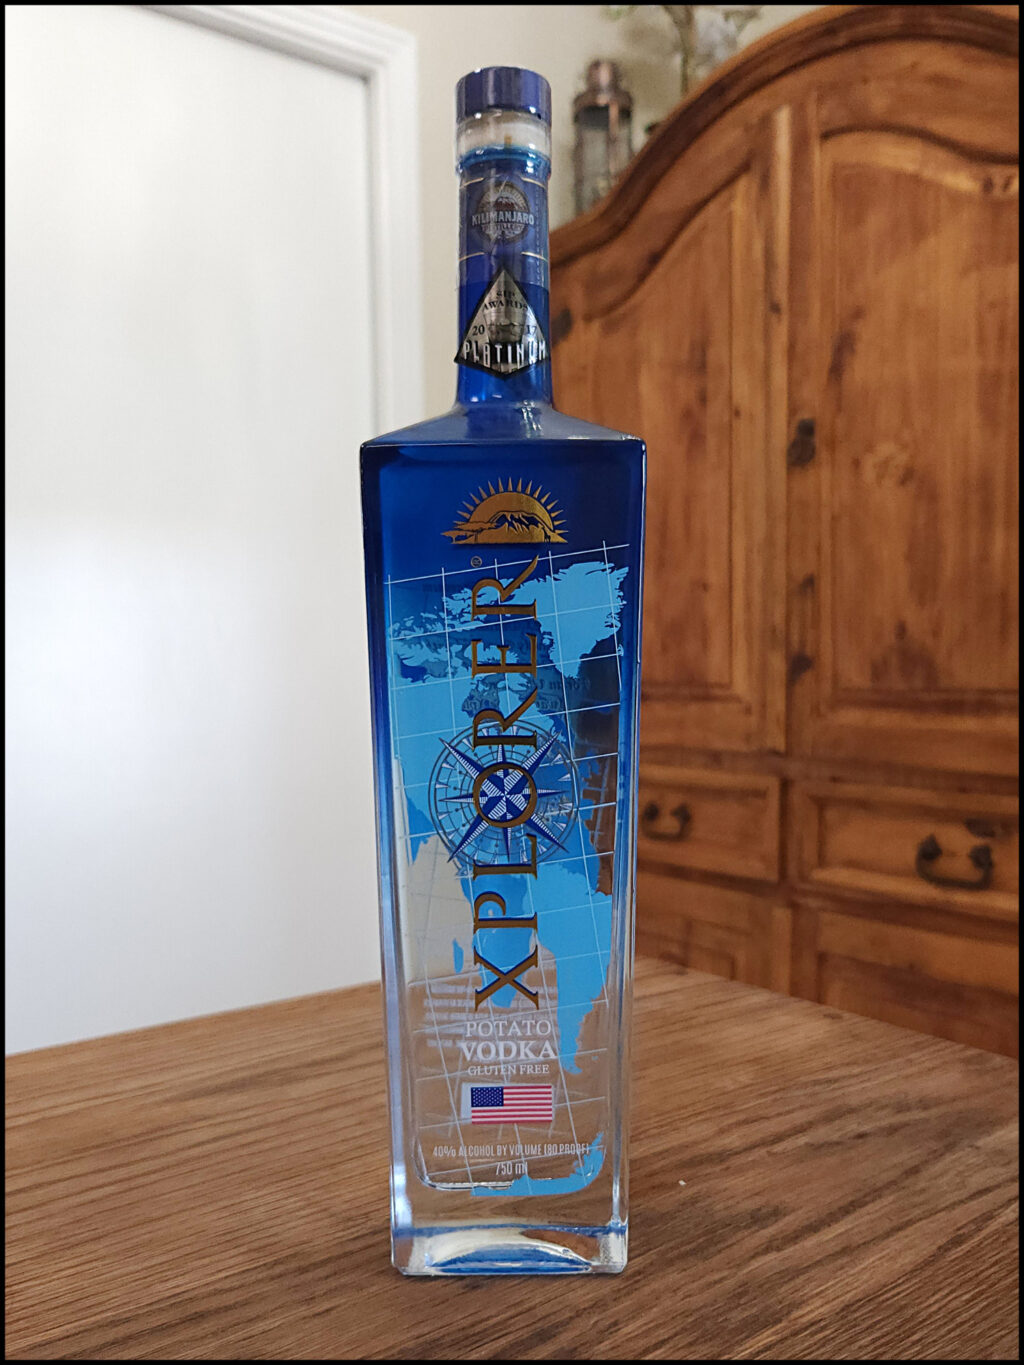 Bottle of Xplorer Potato Vodka sitting on a wooden table, in front of a mixed white and wooden background